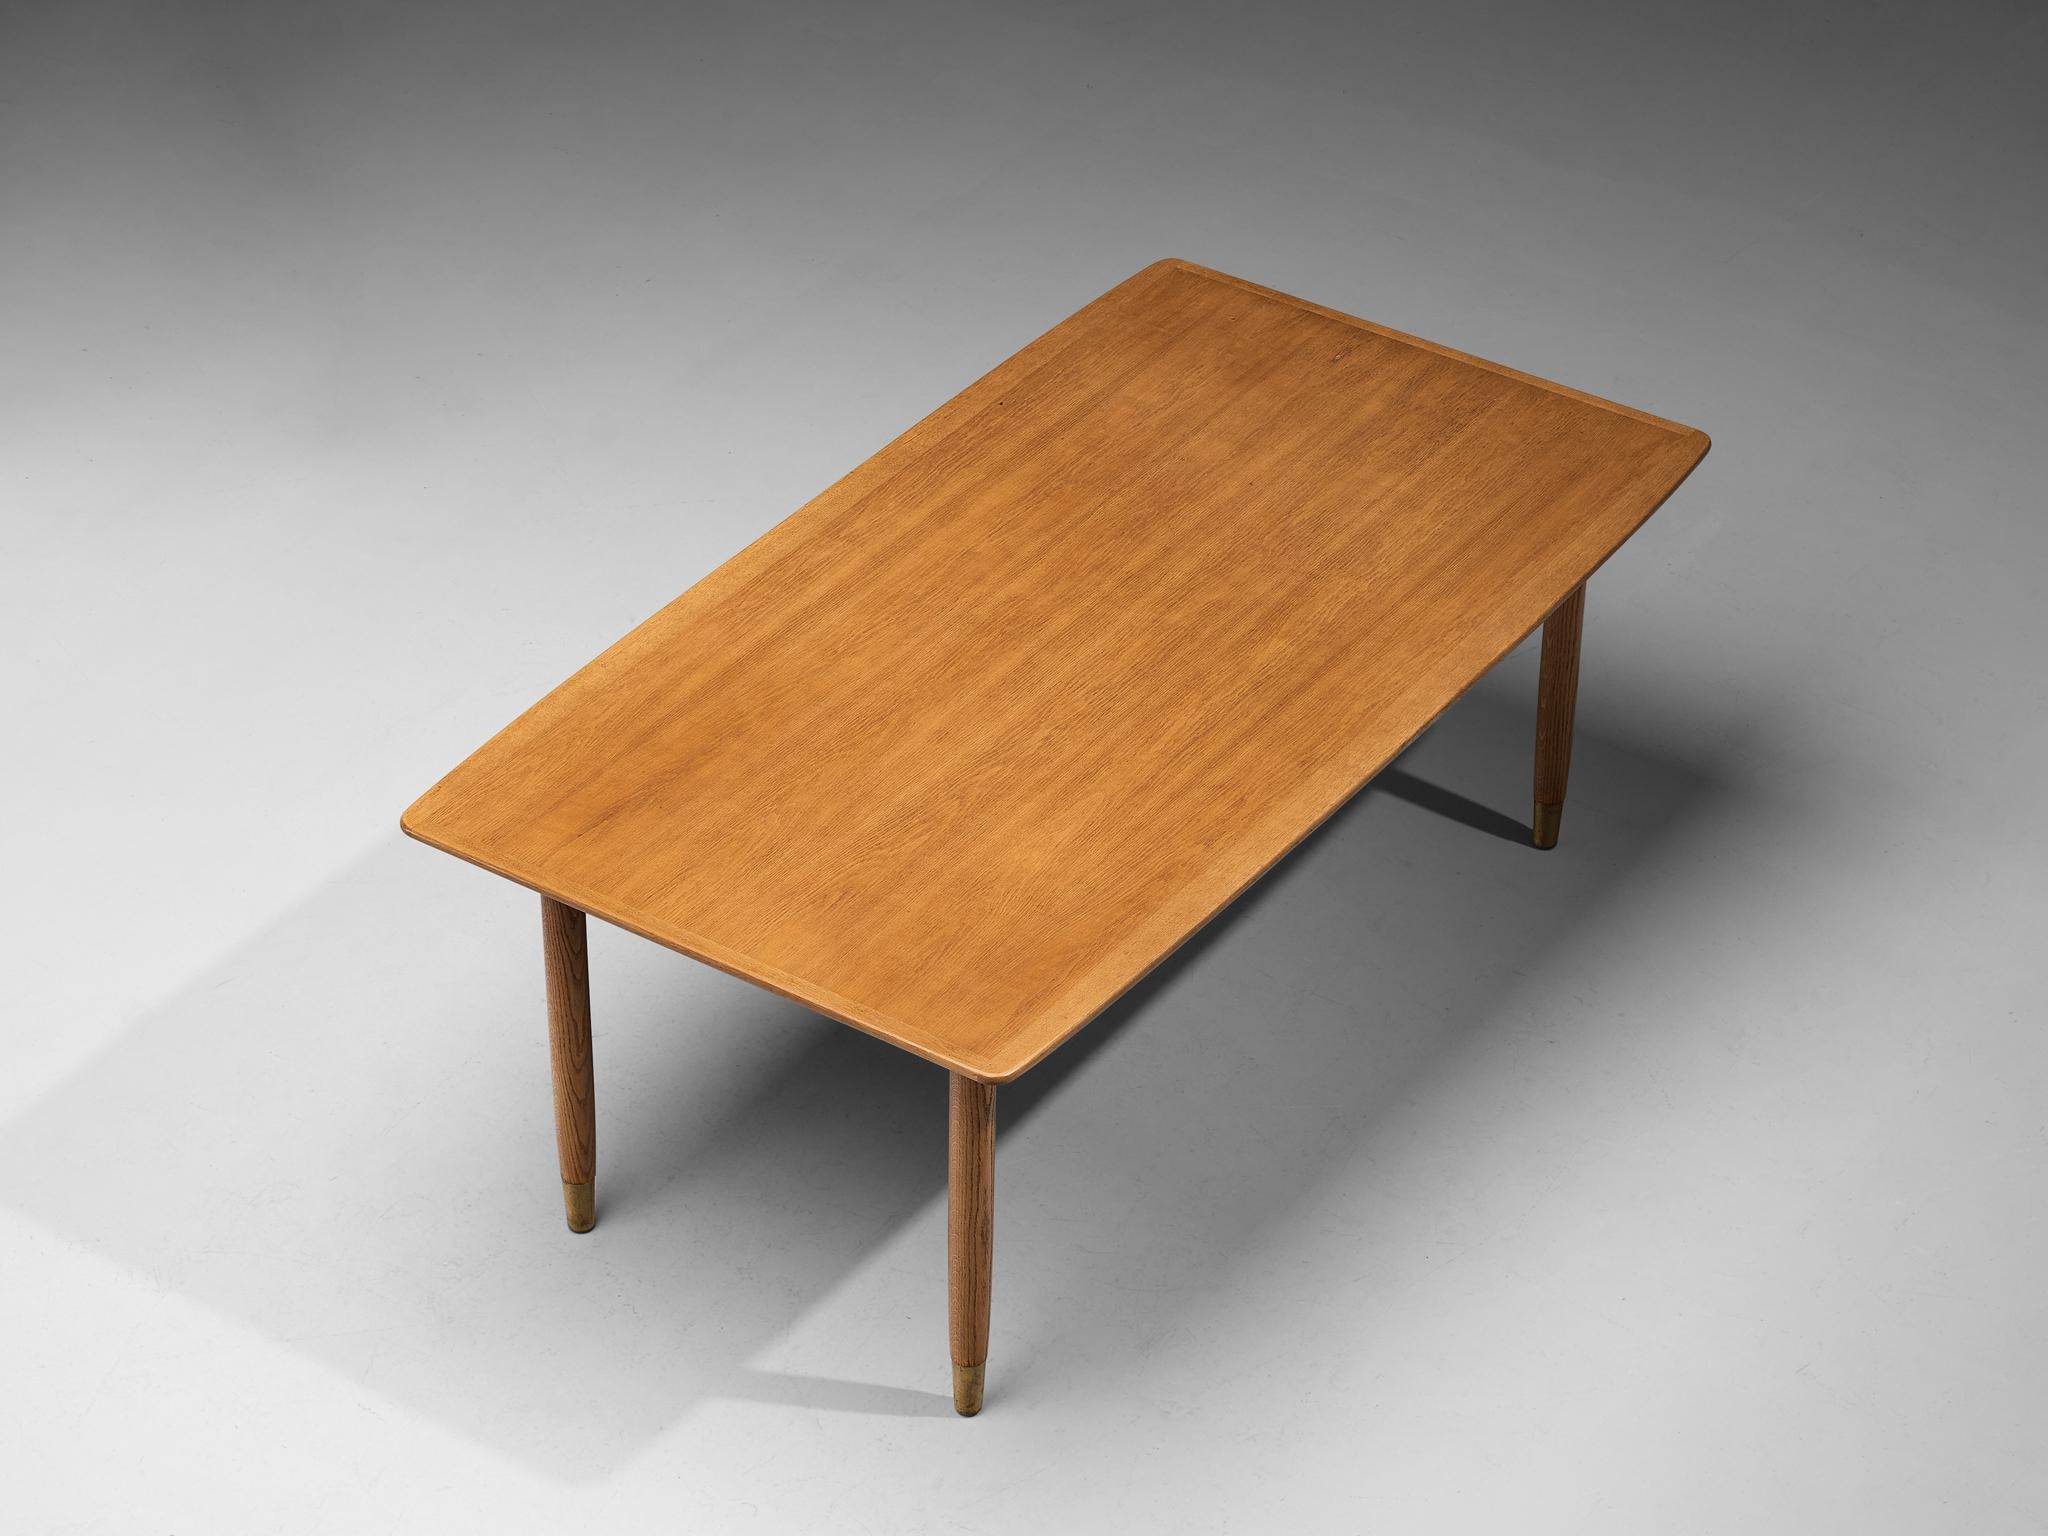 Dining table, oak, brass, Denmark, 1950s

Scandinavian Modern dining table with rectangular top. The warm colored top rests on four circular, tapered legs that have brass feet. This detail gives the design strength and characterizes this